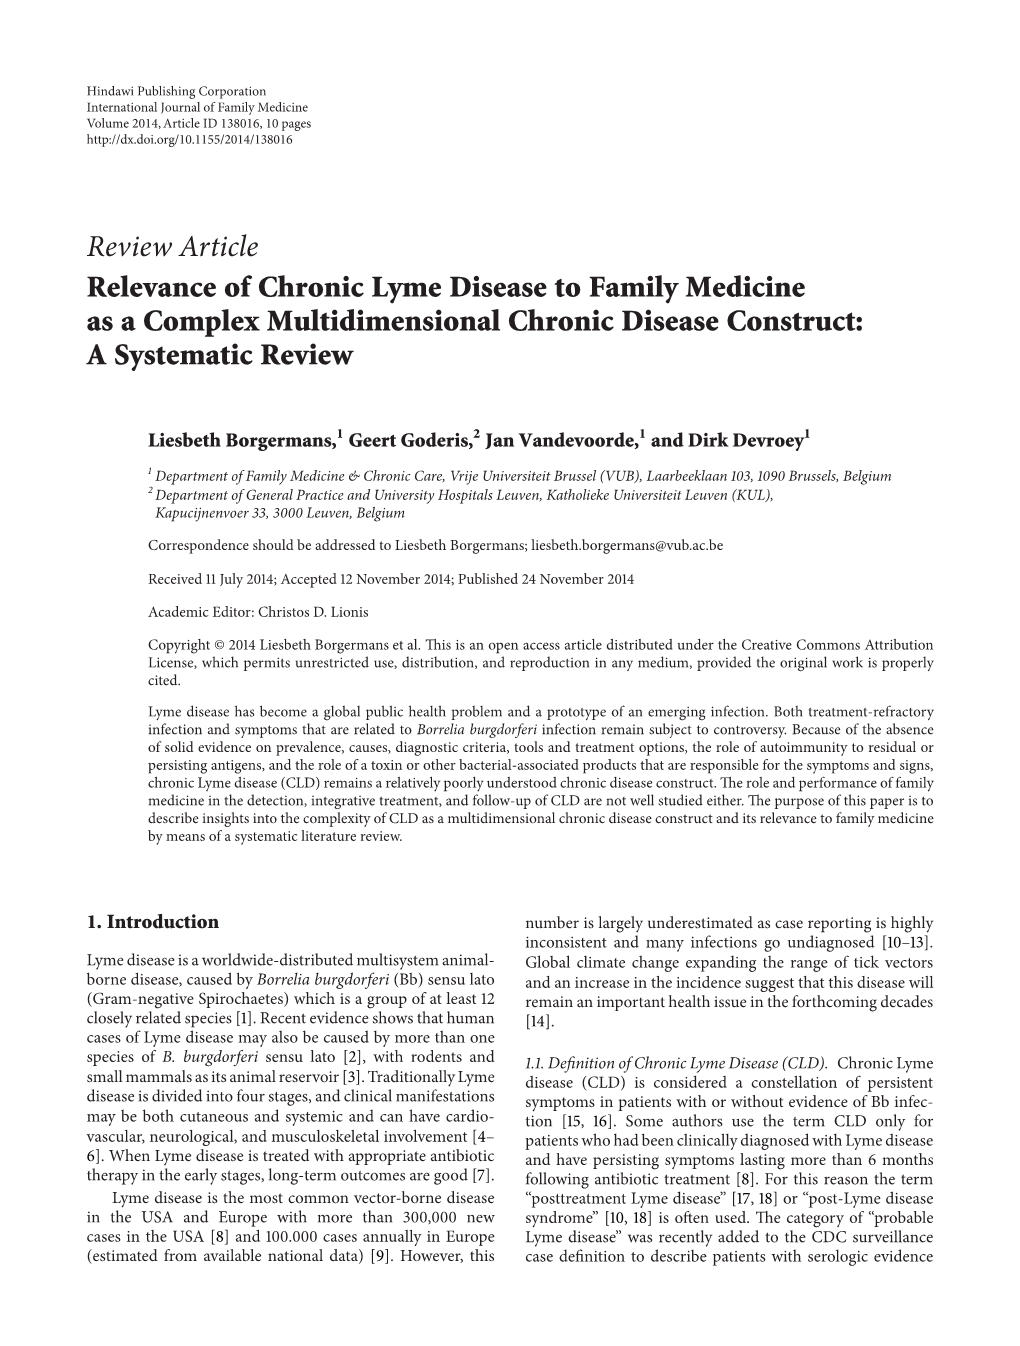 Review Article Relevance of Chronic Lyme Disease to Family Medicine As a Complex Multidimensional Chronic Disease Construct: a Systematic Review